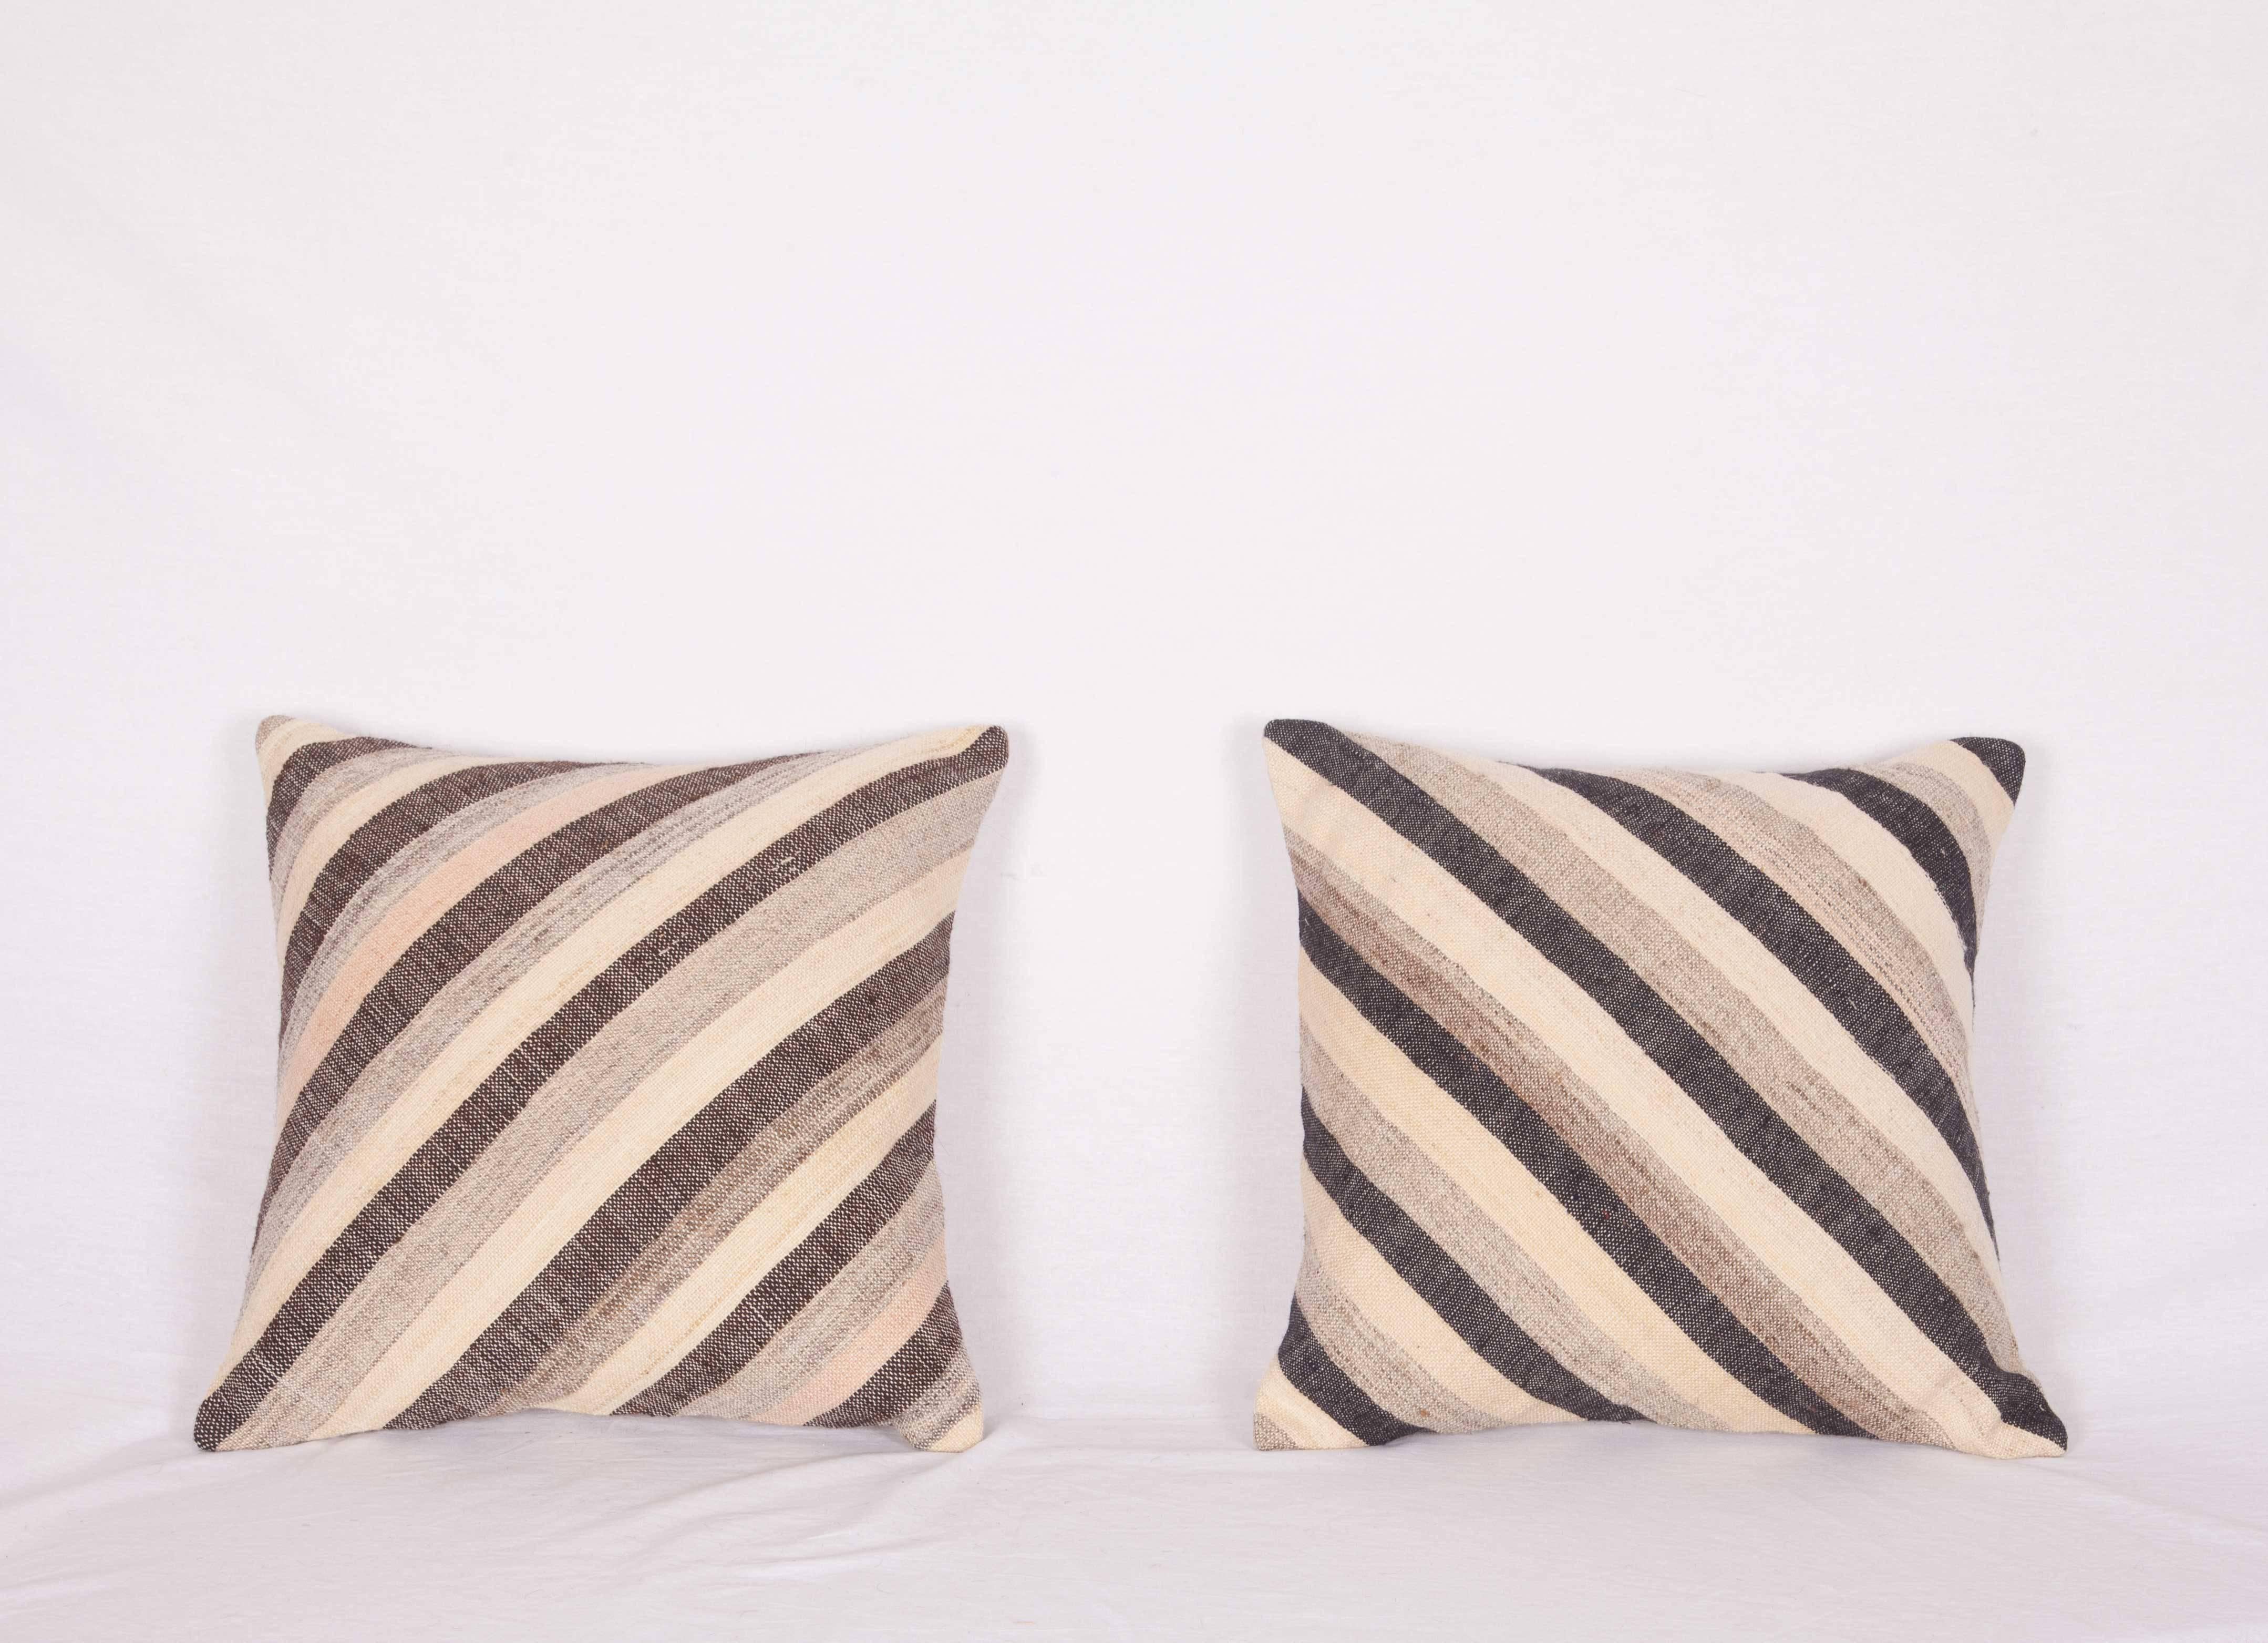 The pillows are made out of a mid-20th century, Turkish Kilim. They do not come with an insert but they come with a bag made to the size and out of cotton to accommodate the filling. The backing is made of linen. Please note filling is not provided.